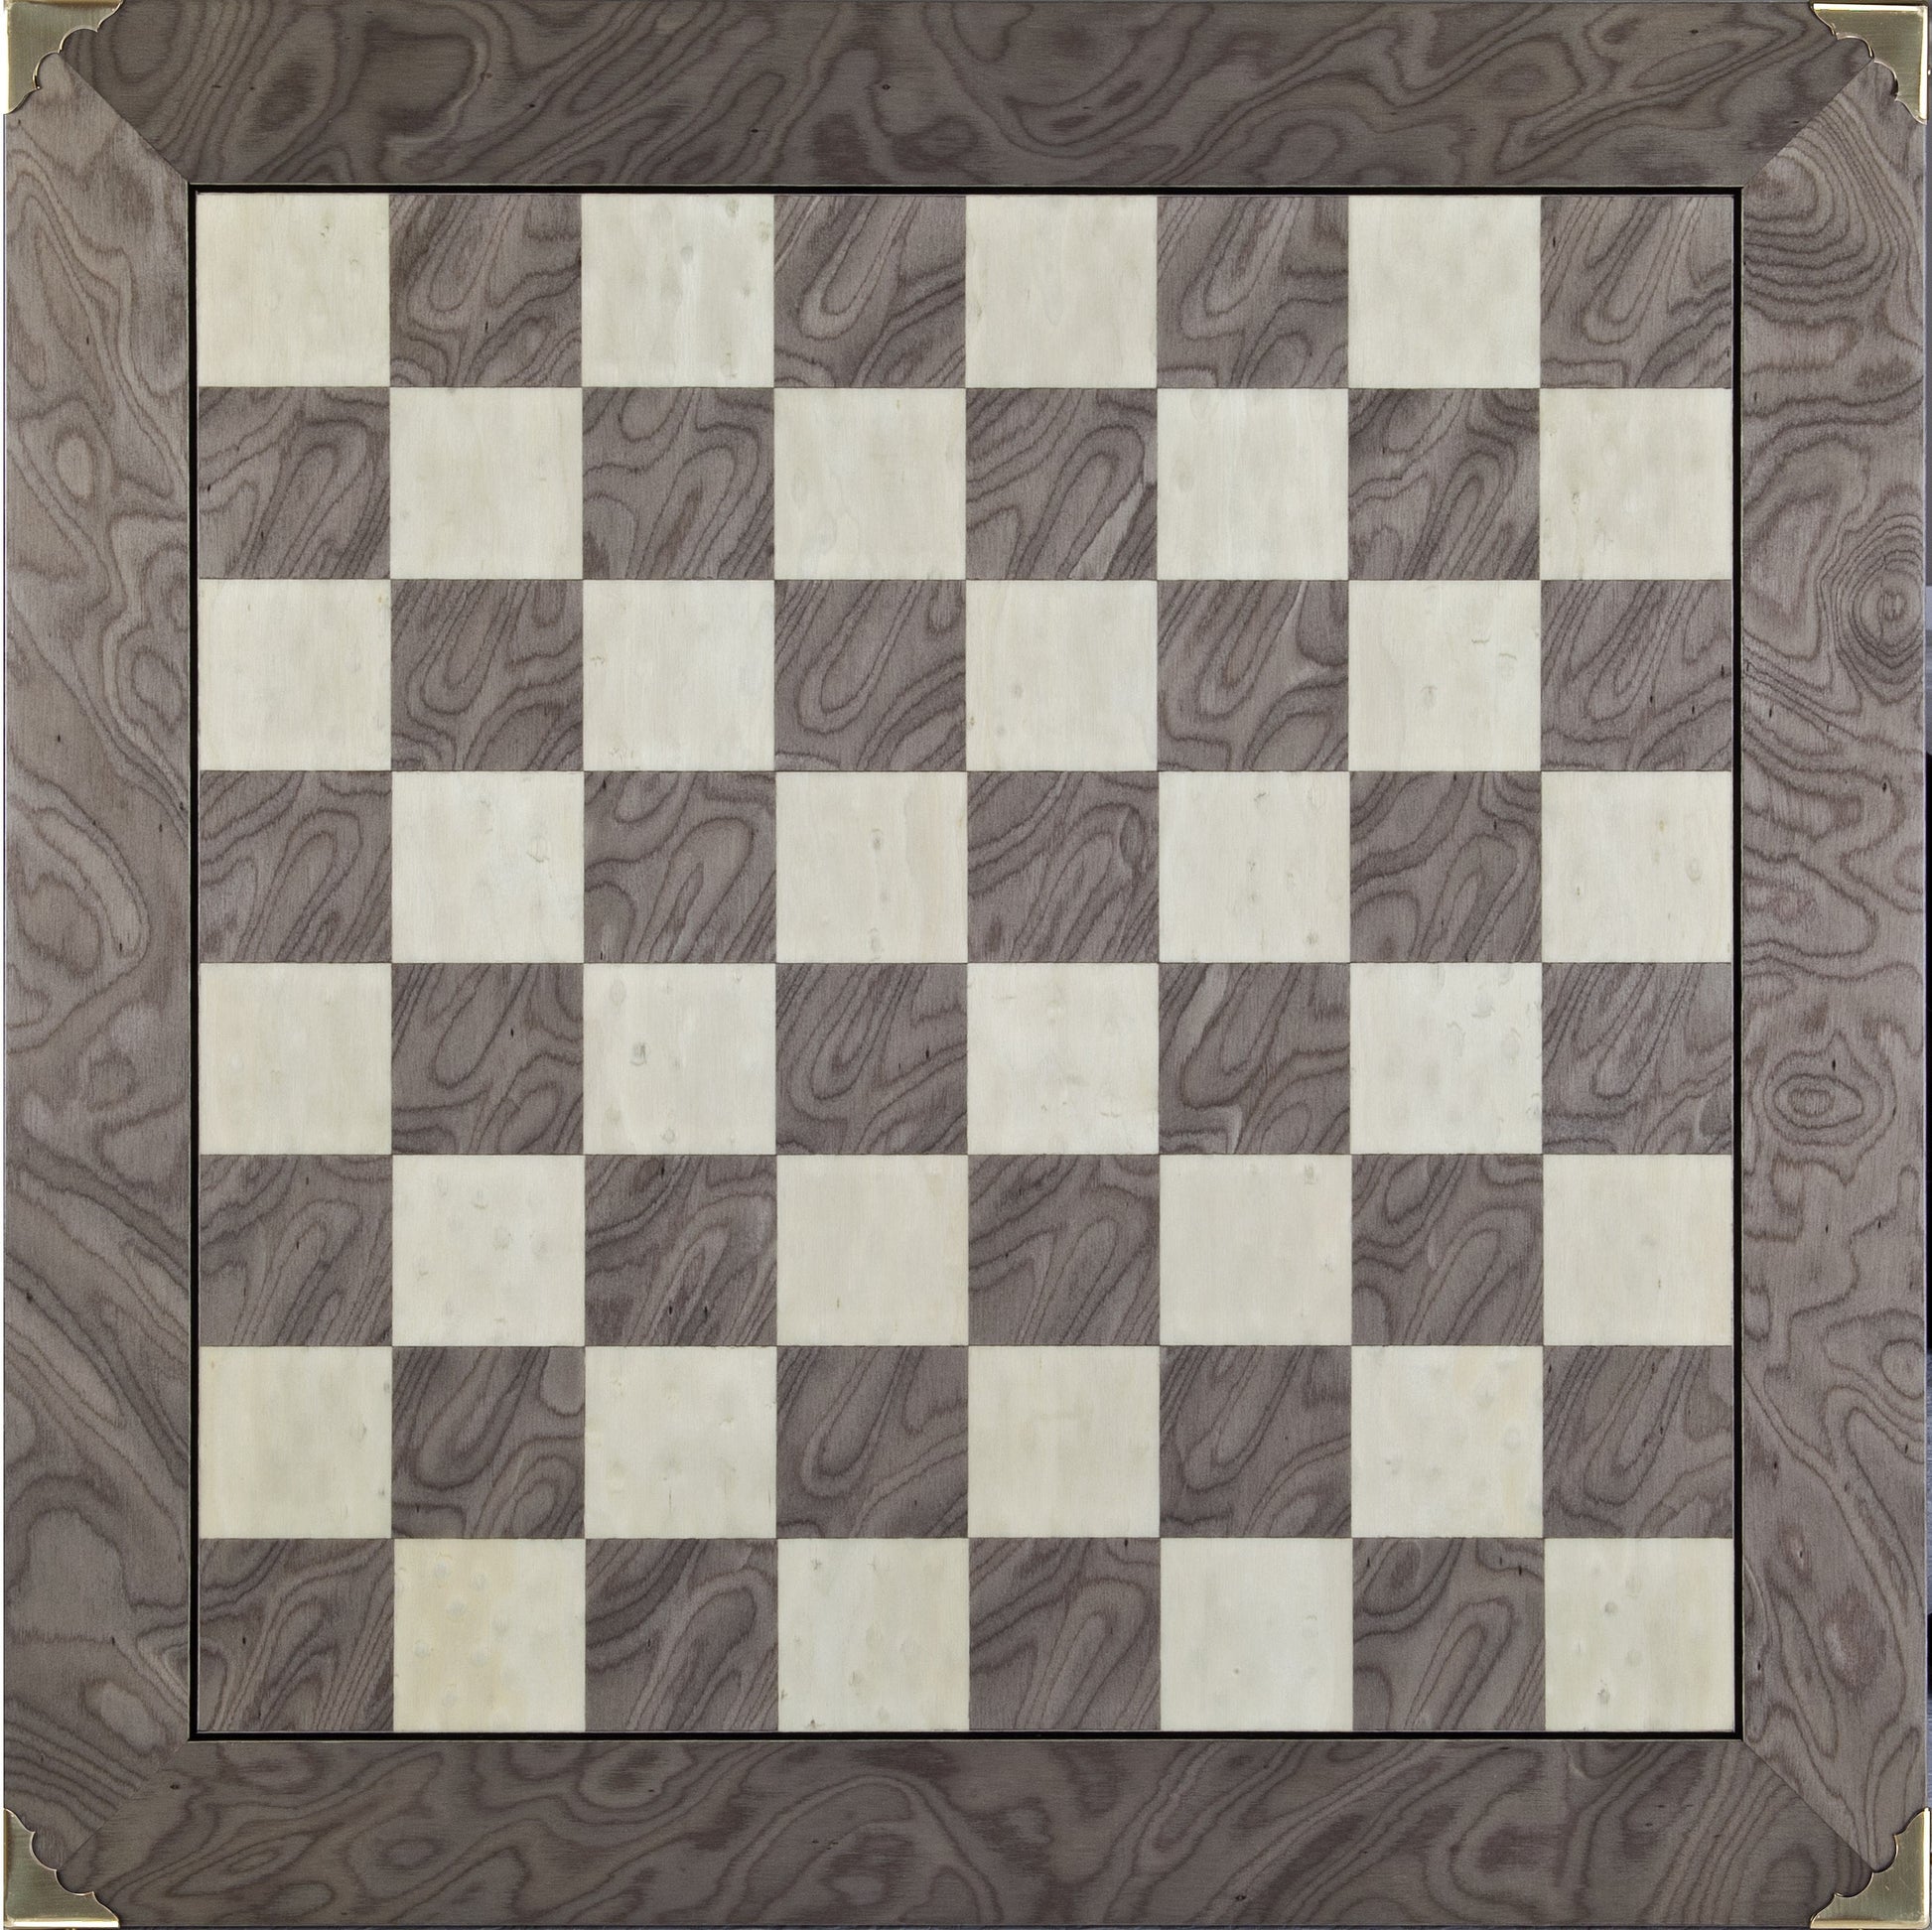 20 inch Superior Chess Board with brass corners